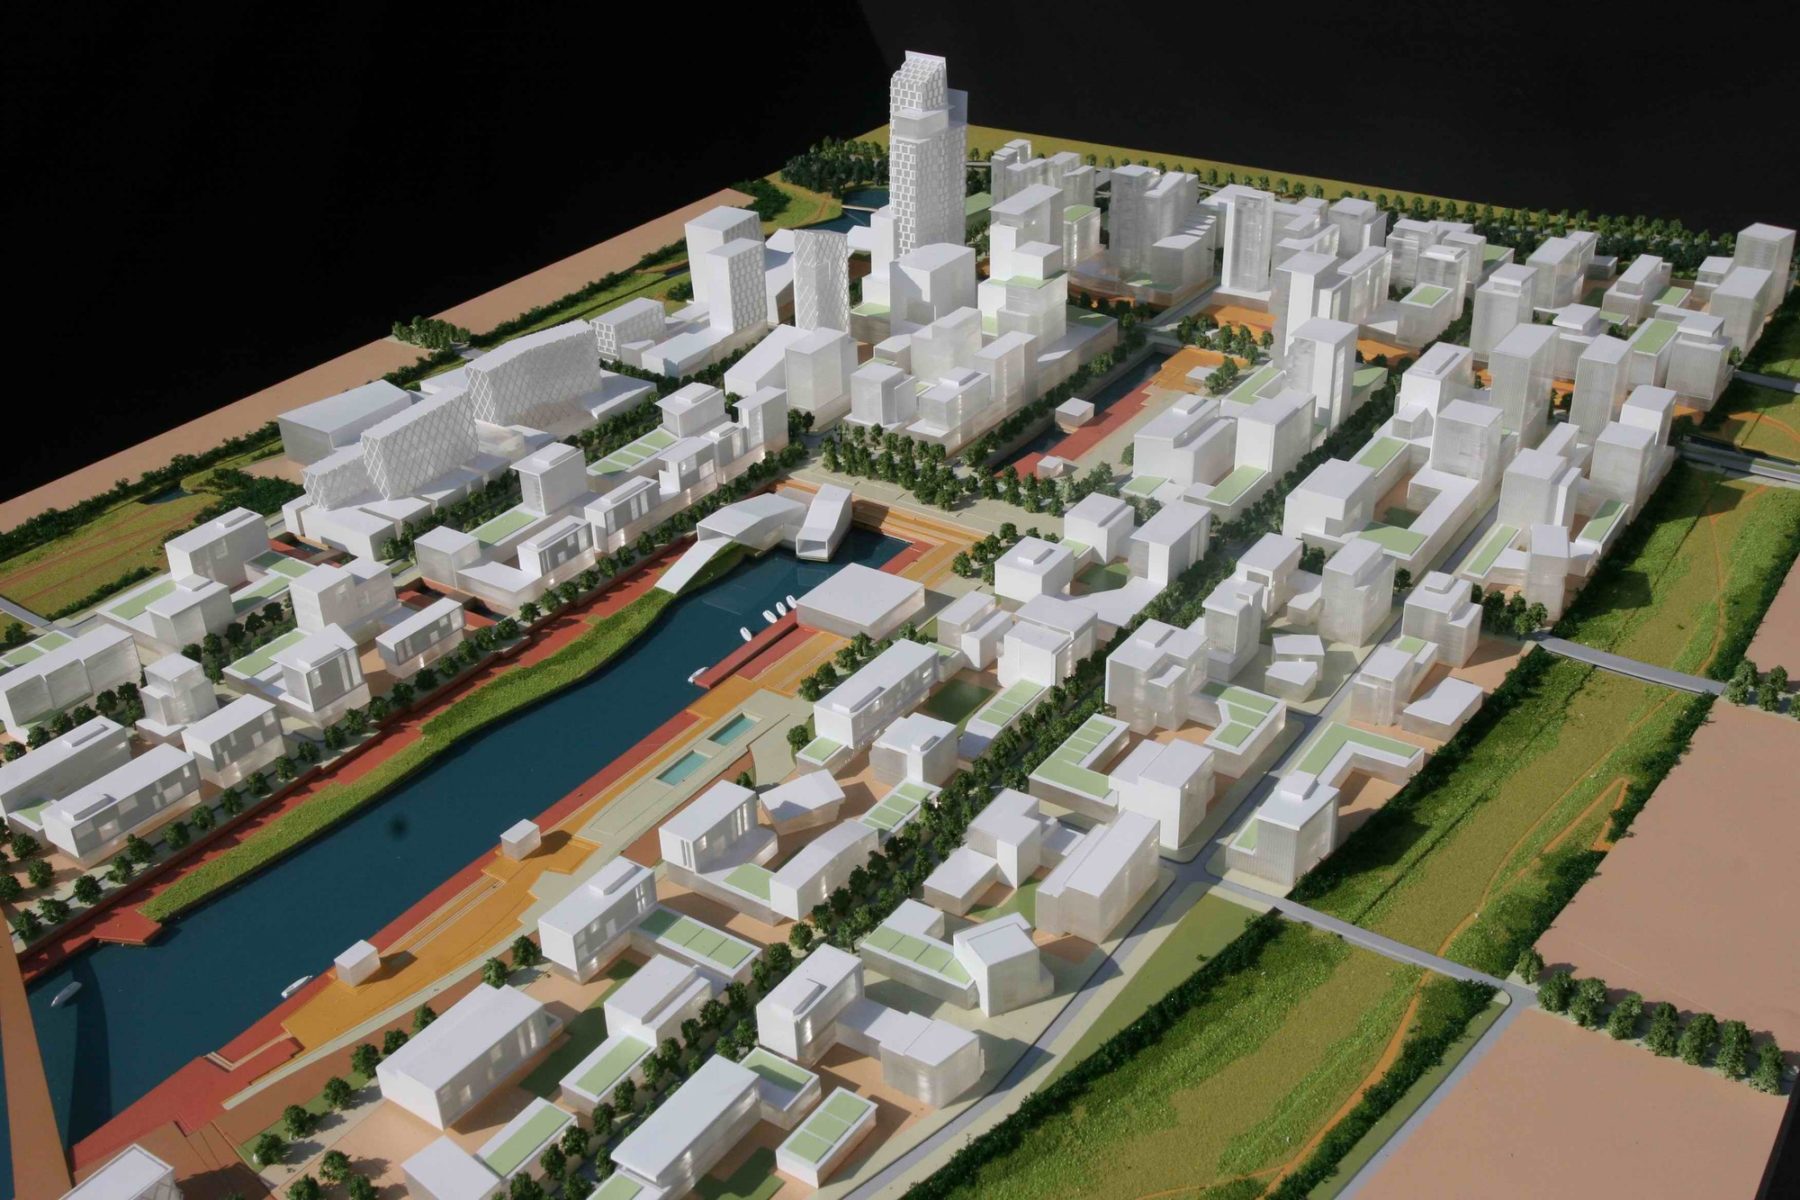 Model of the district